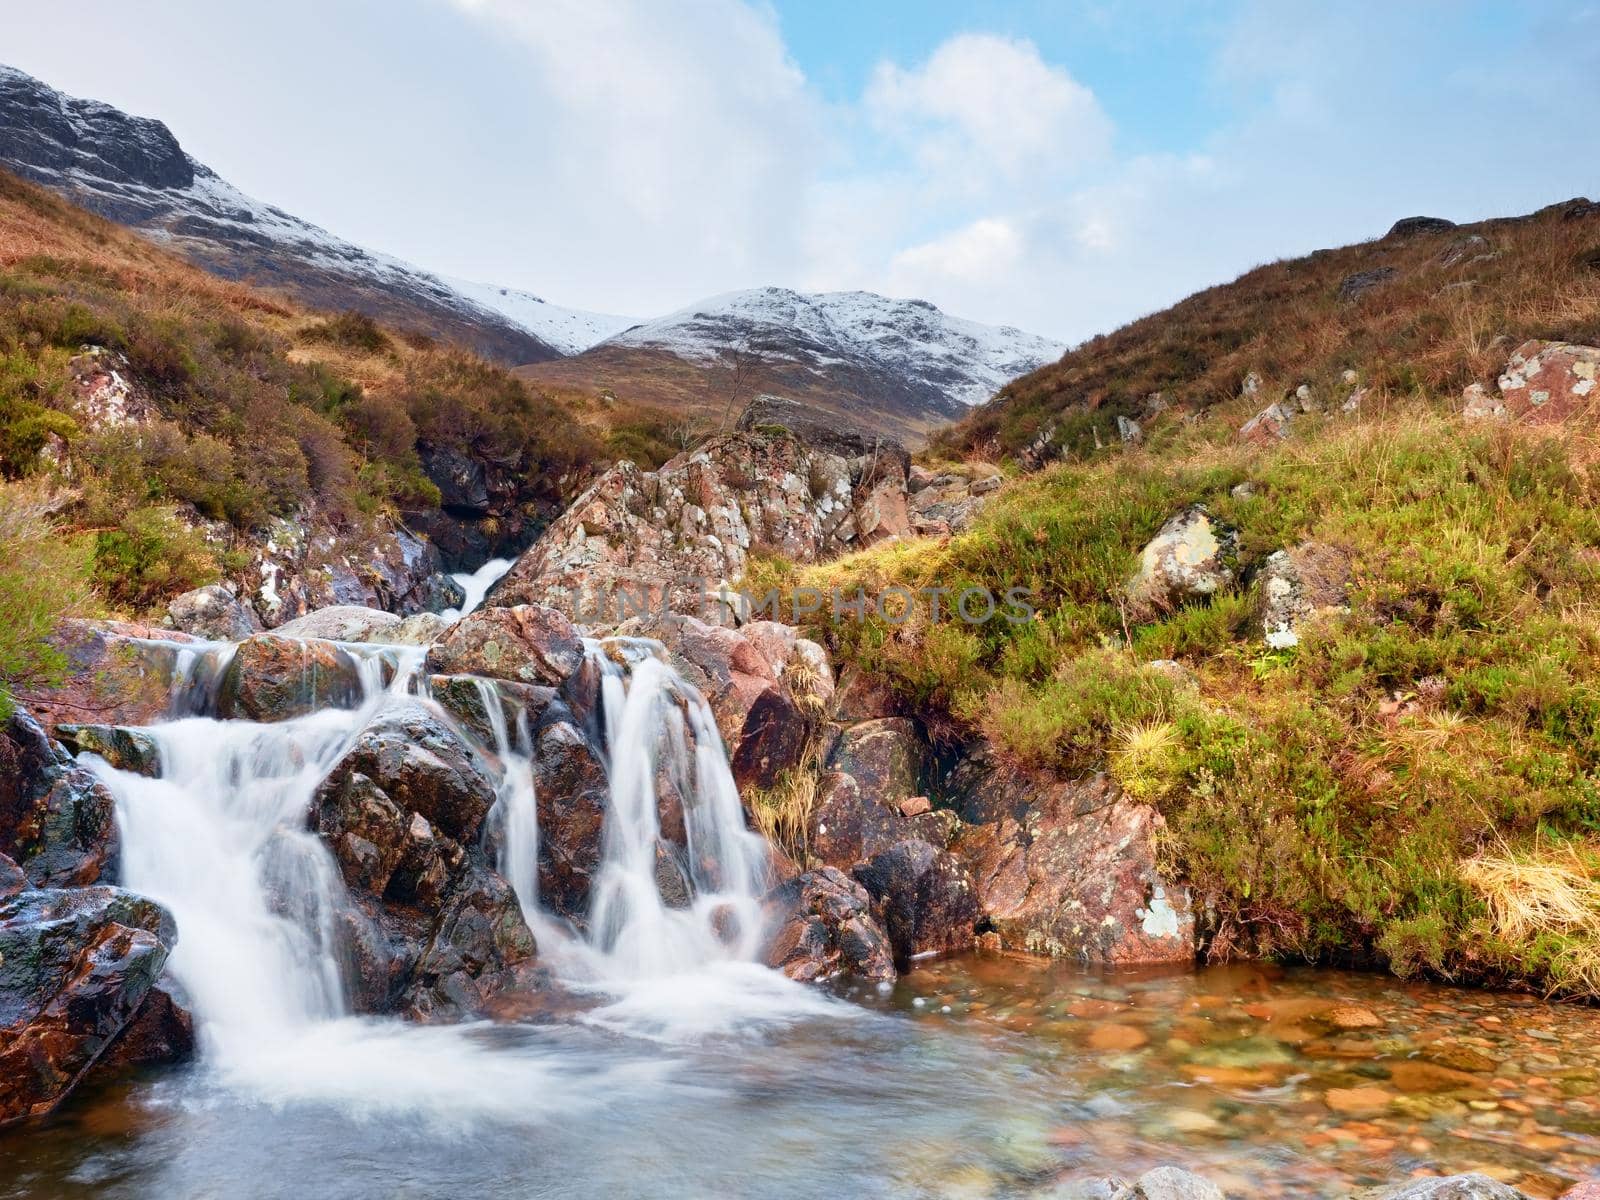 Rapids in small waterfall on stream, Higland in Scotland an early spring day. Snowy mountain peaks by rdonar2